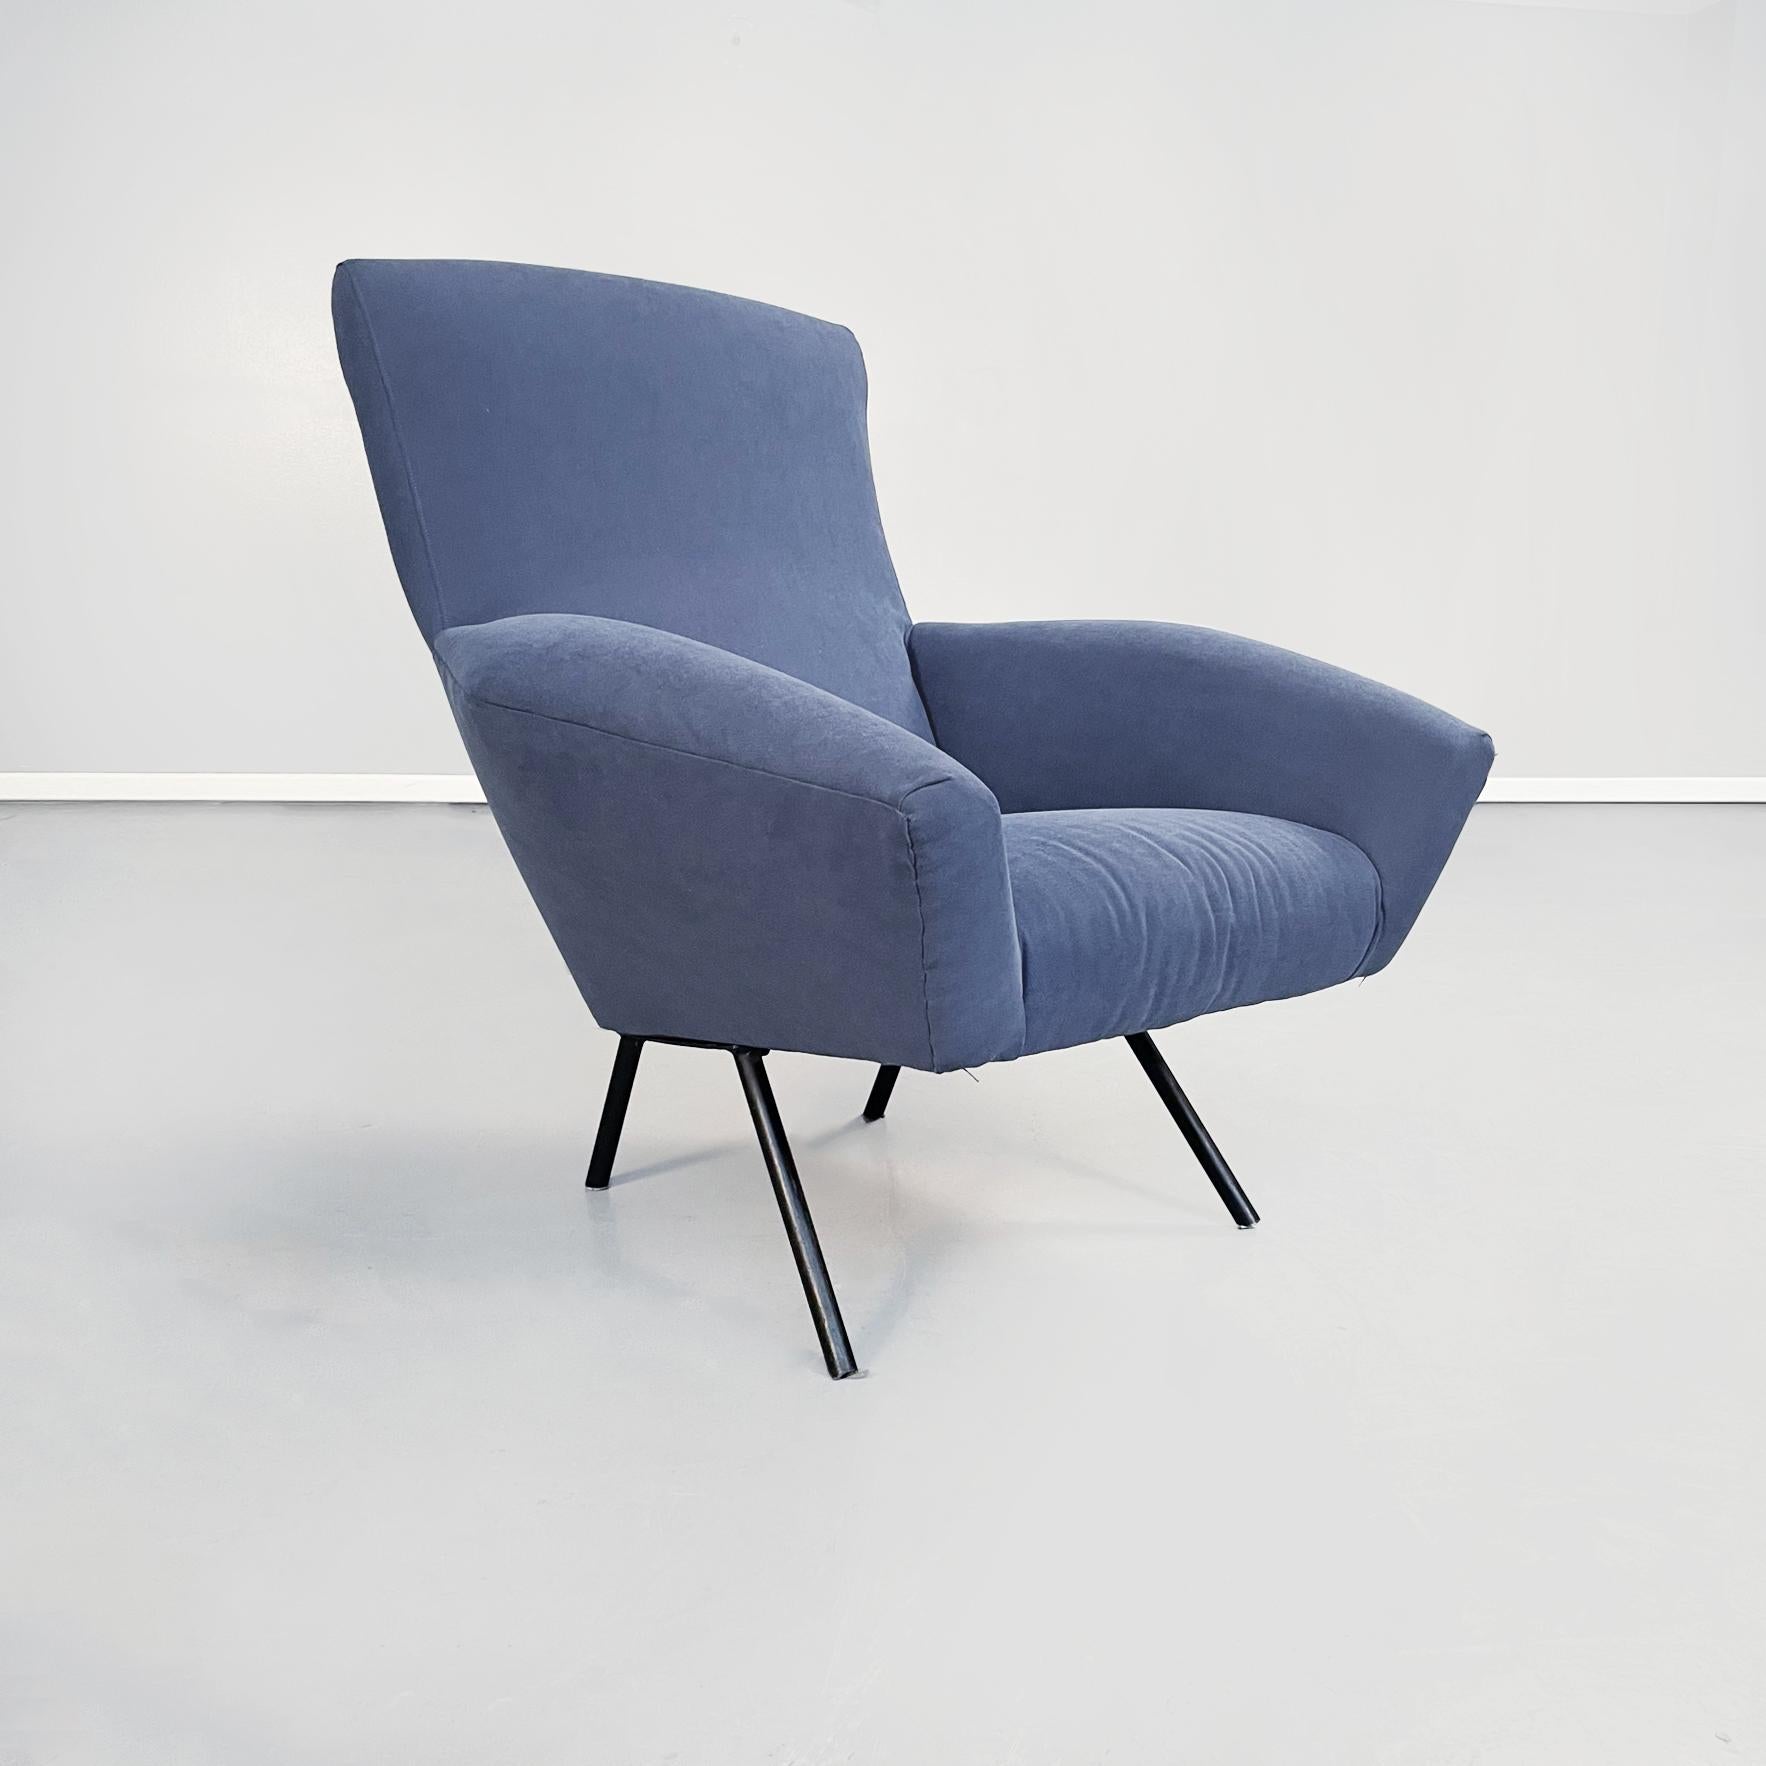 Italian Mid-Century Modern blue fabric armchairs with tubular black metal, 1960s
Pair of armchairs with tubular structure in black painted metal. The seat and back are padded and upholstered in a blue fabric. The armrests have an irregular shape